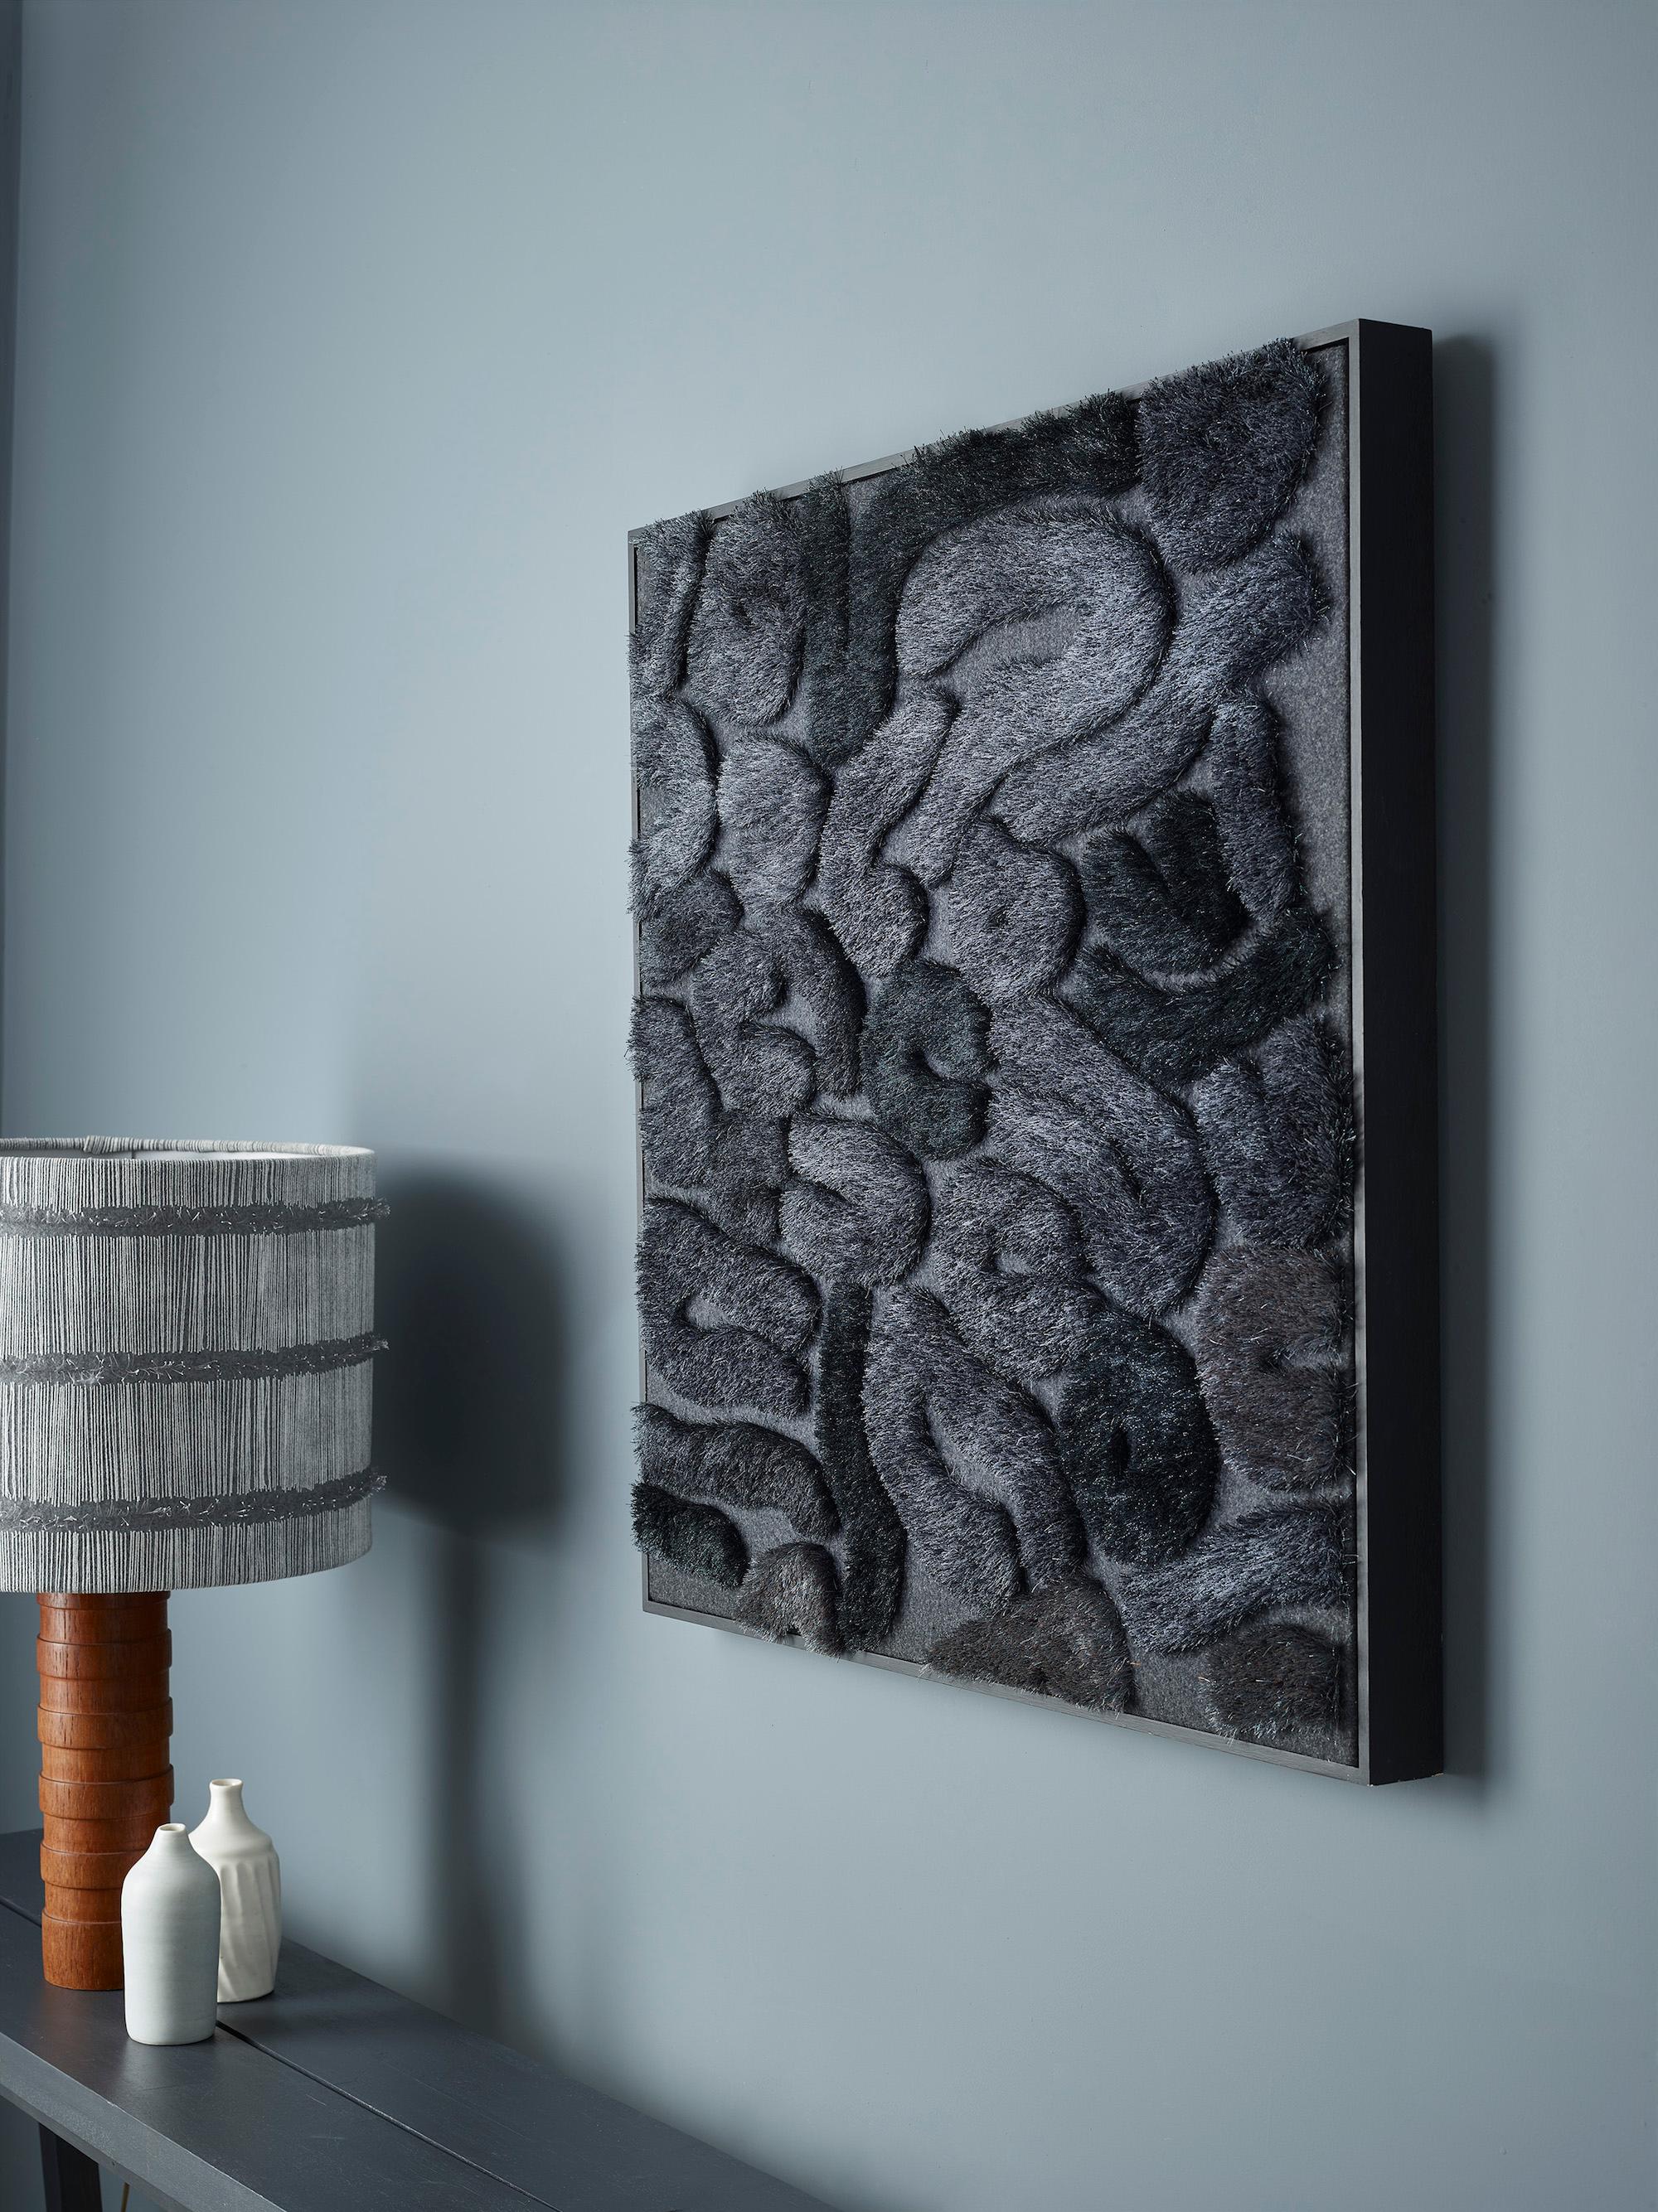 Wool Aerial - framed and tufted textile artwork by British artist Anna Gravelle For Sale